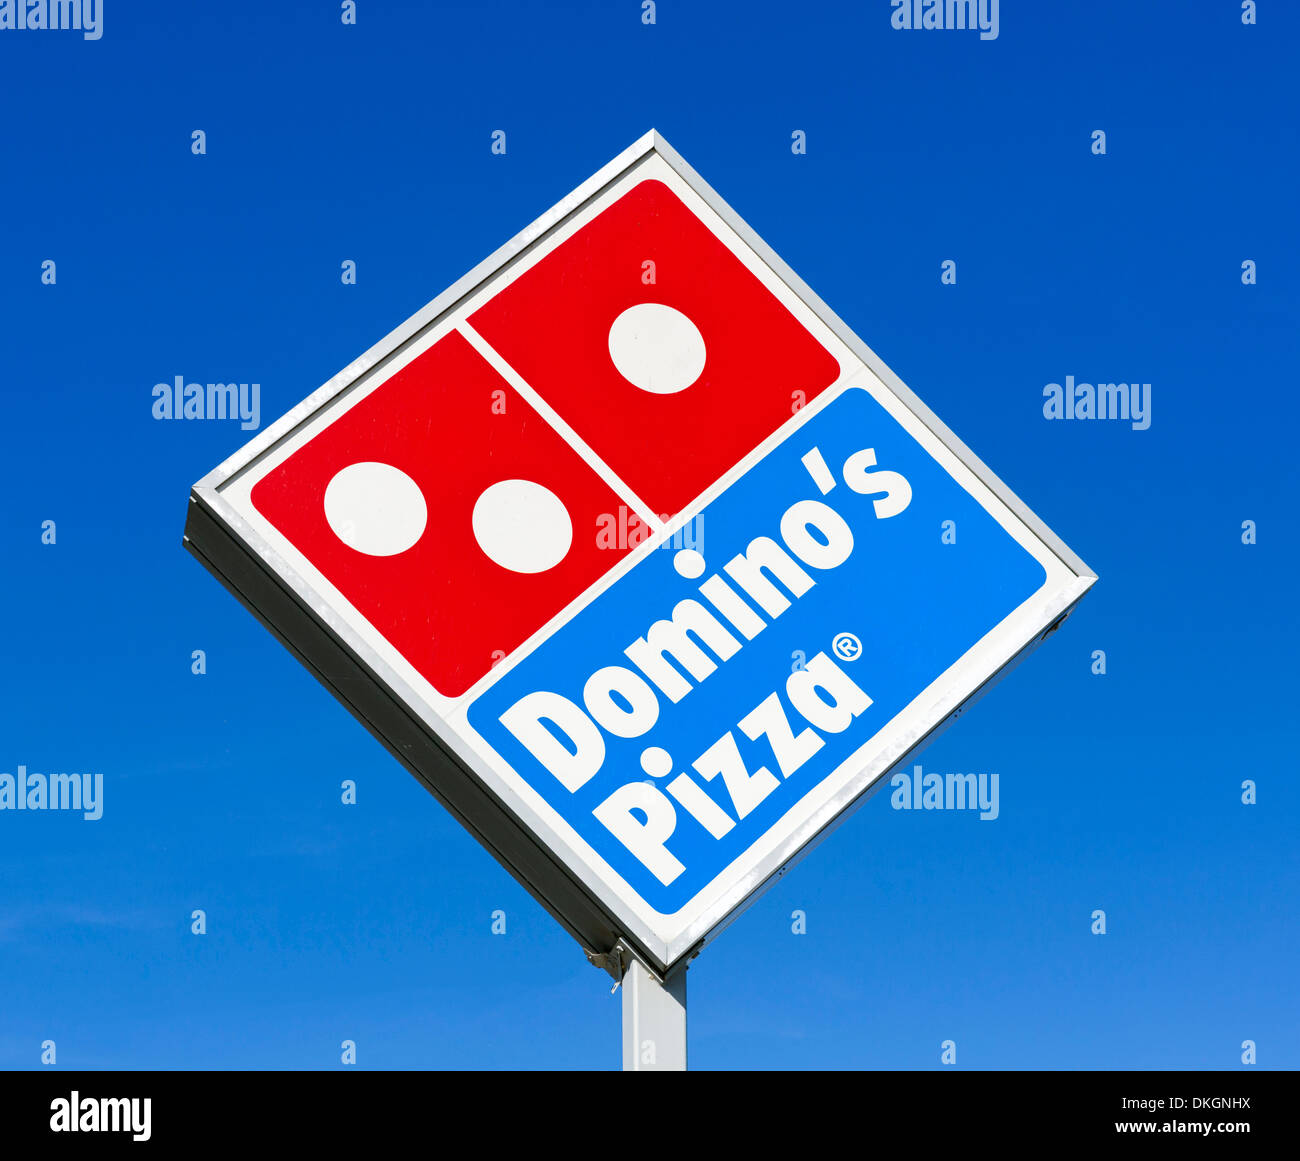 Domino's Pizza sign, Central Florida, USA Banque D'Images